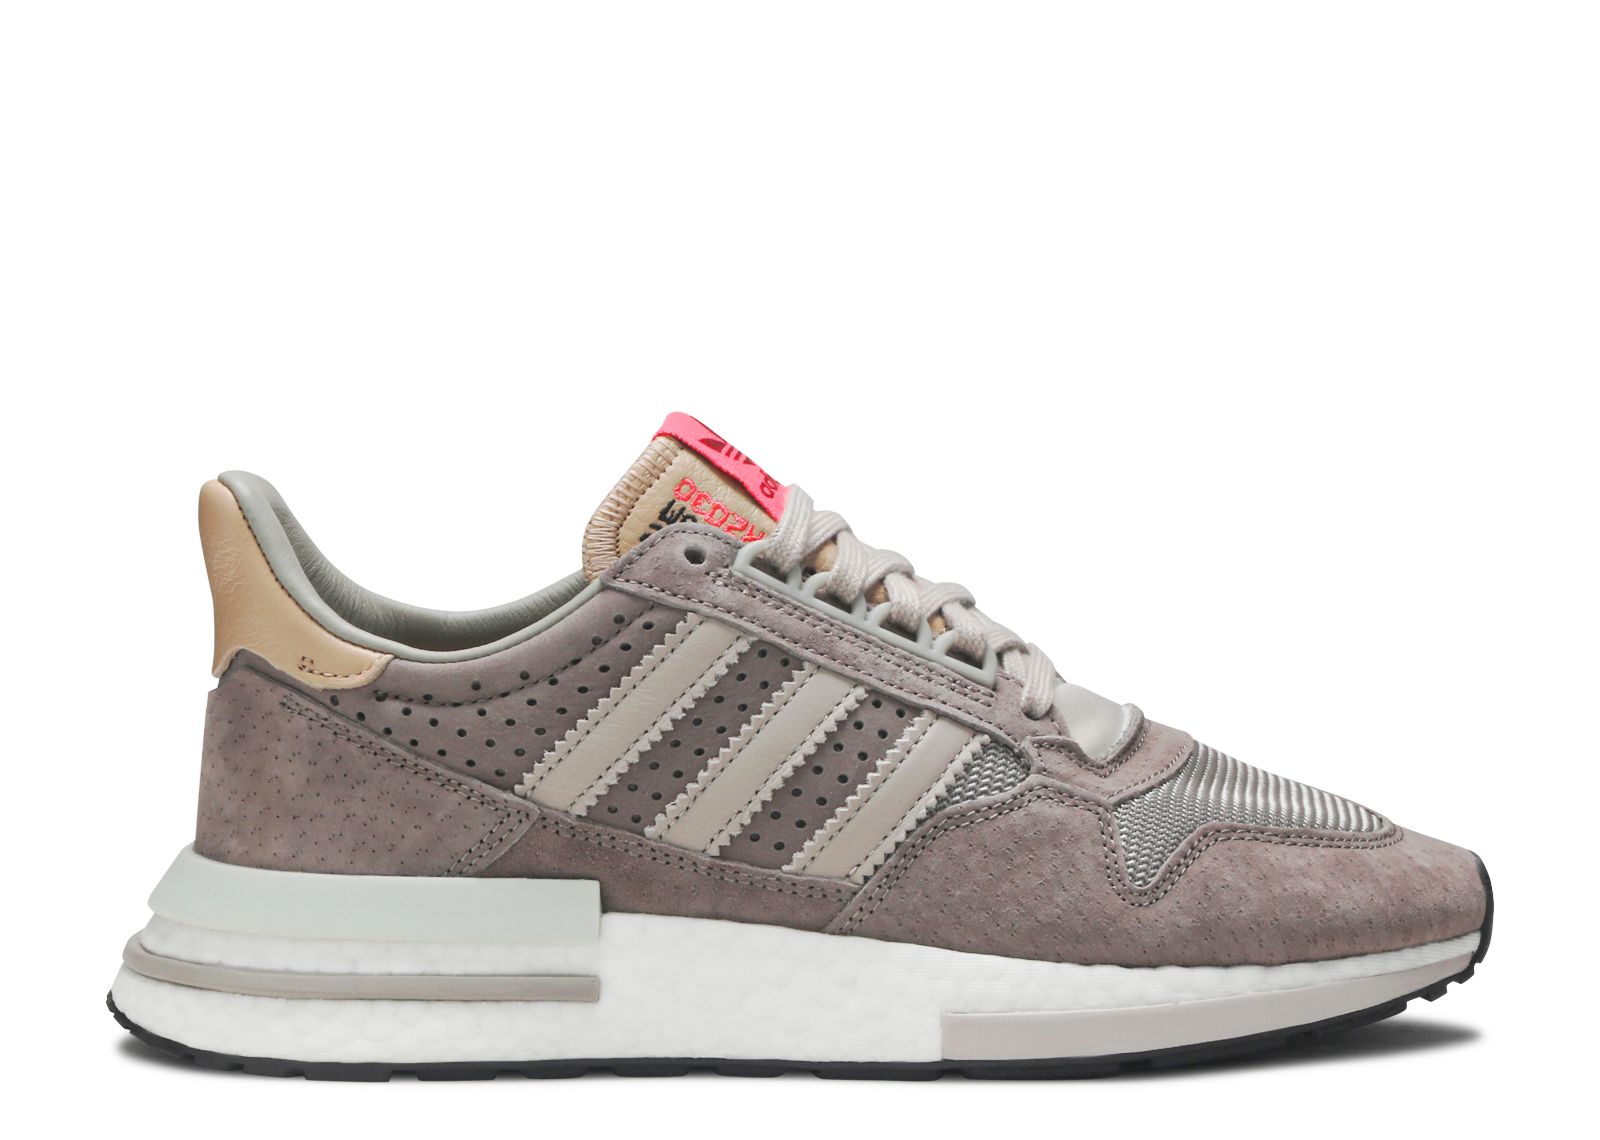 Кроссовки adidas Zx 500 Rm 'Sand Brown', коричневый кроссовки adidas zx 500 rm white navy red size exclusive